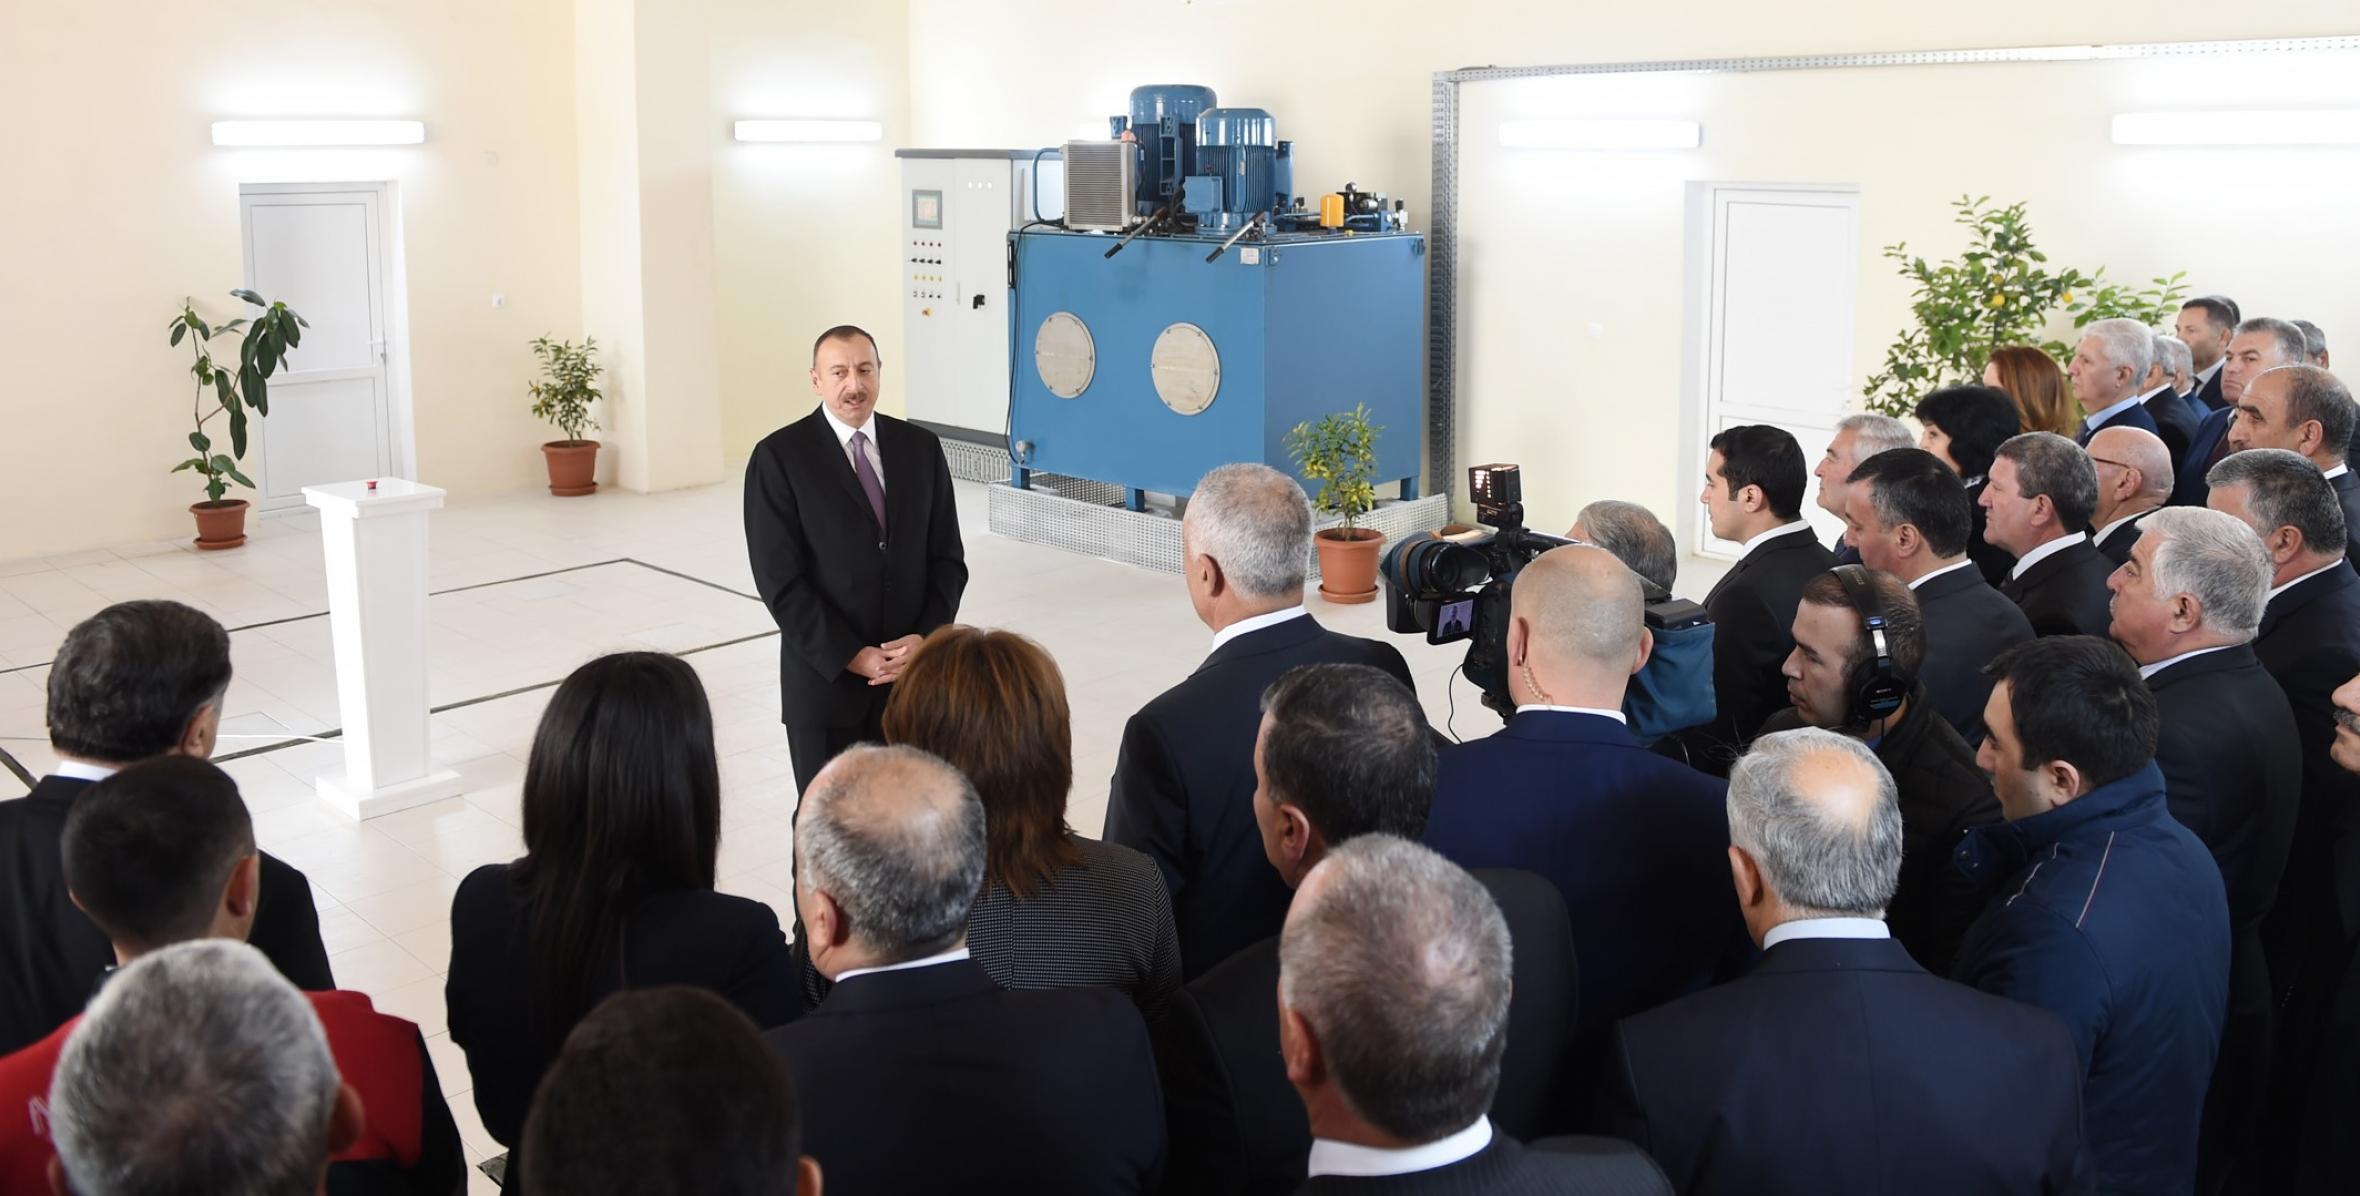 Speech by Ilham Aliyev at the opening of the Tovuzchay water reservoir